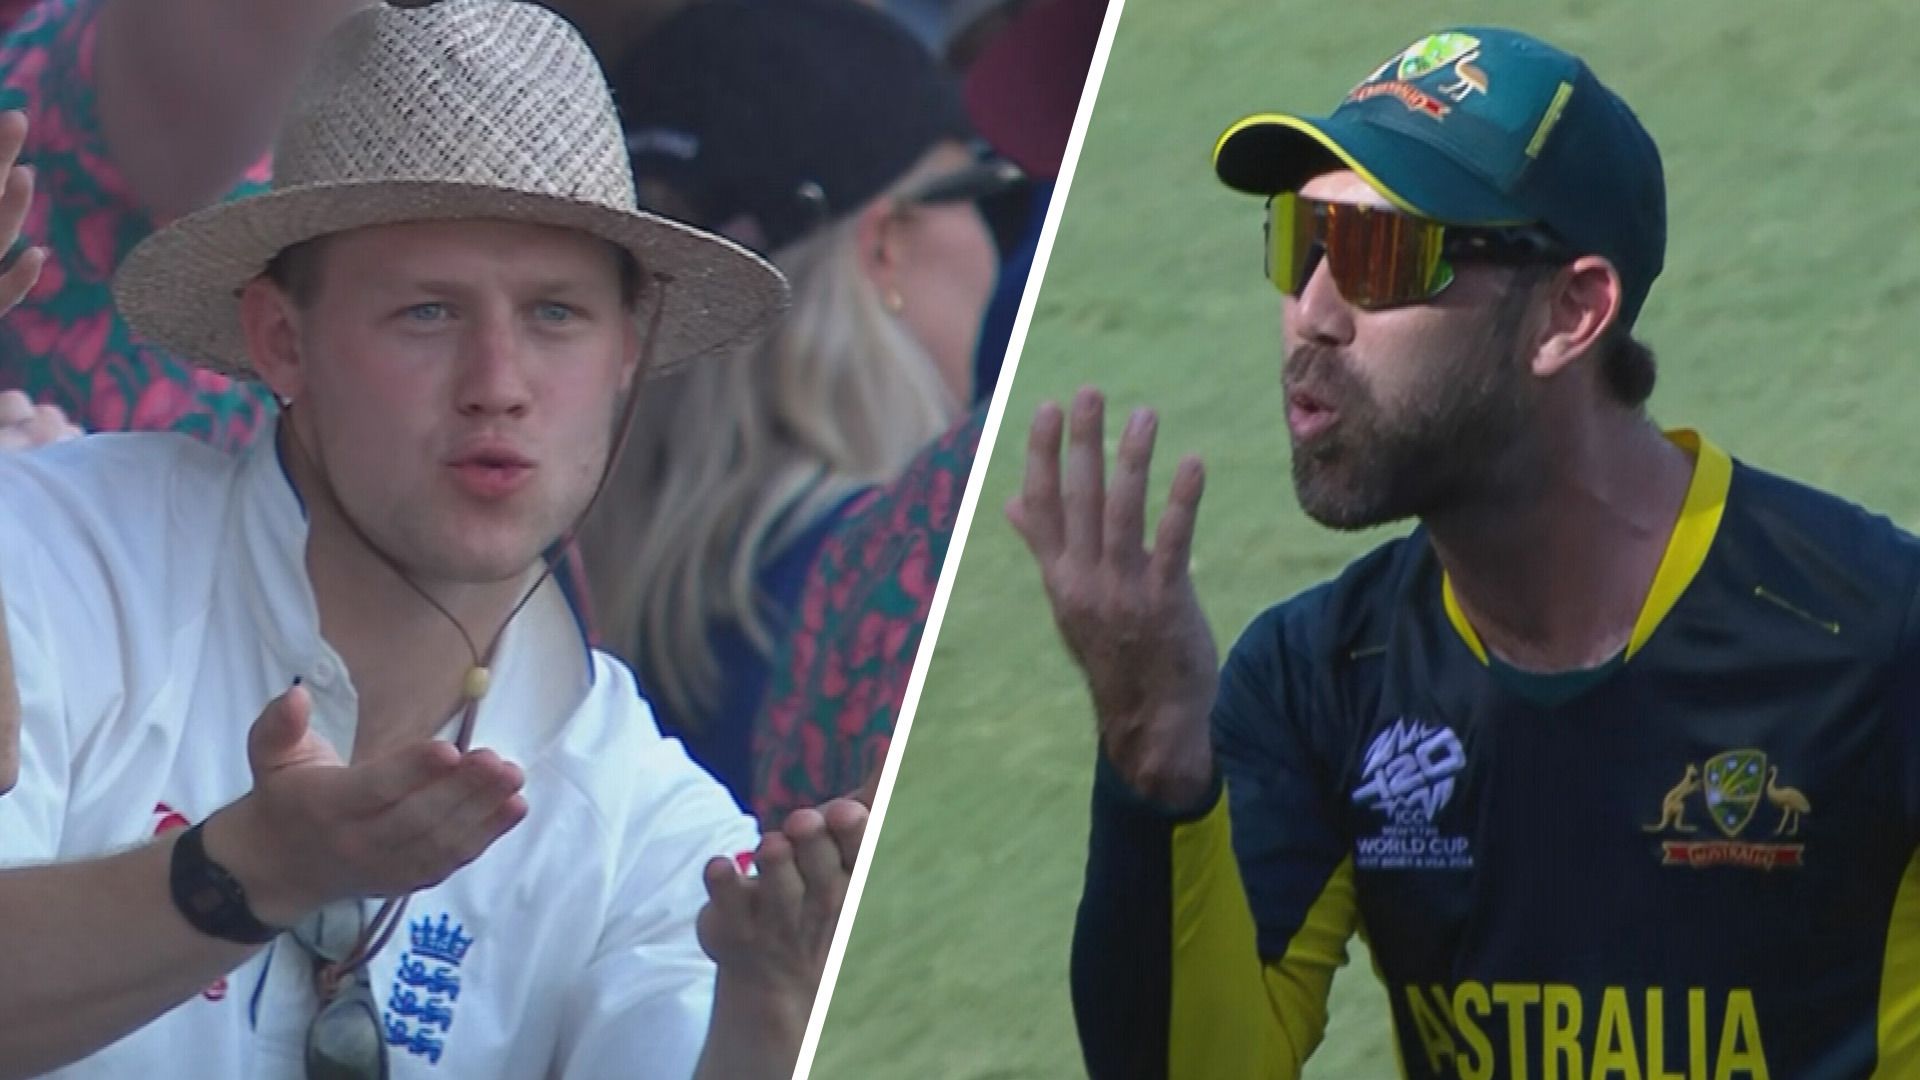 Glenn Maxwell used wrestling icon John Cena&#x27;s classic &#x27;you can&#x27;t see me&#x27; wave to a group of English fans after taking the catch to remove Jonny Bairstow in the T20 World Cup match between Australia and England.